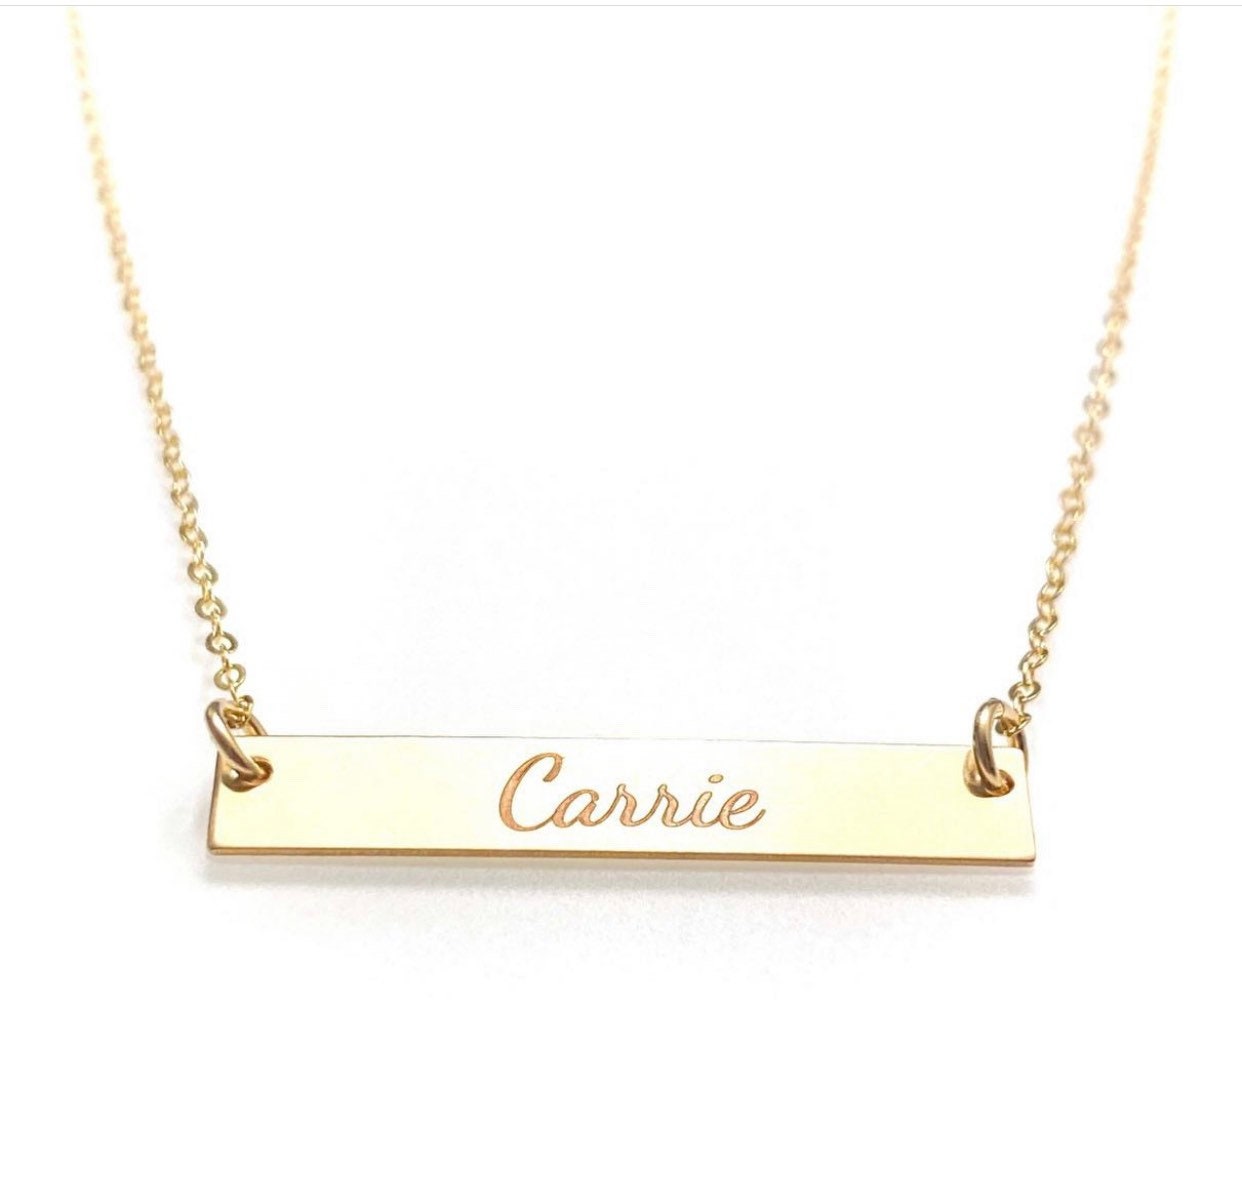 Name plate engraved necklace (14K gold-filled and sterling silver options available)